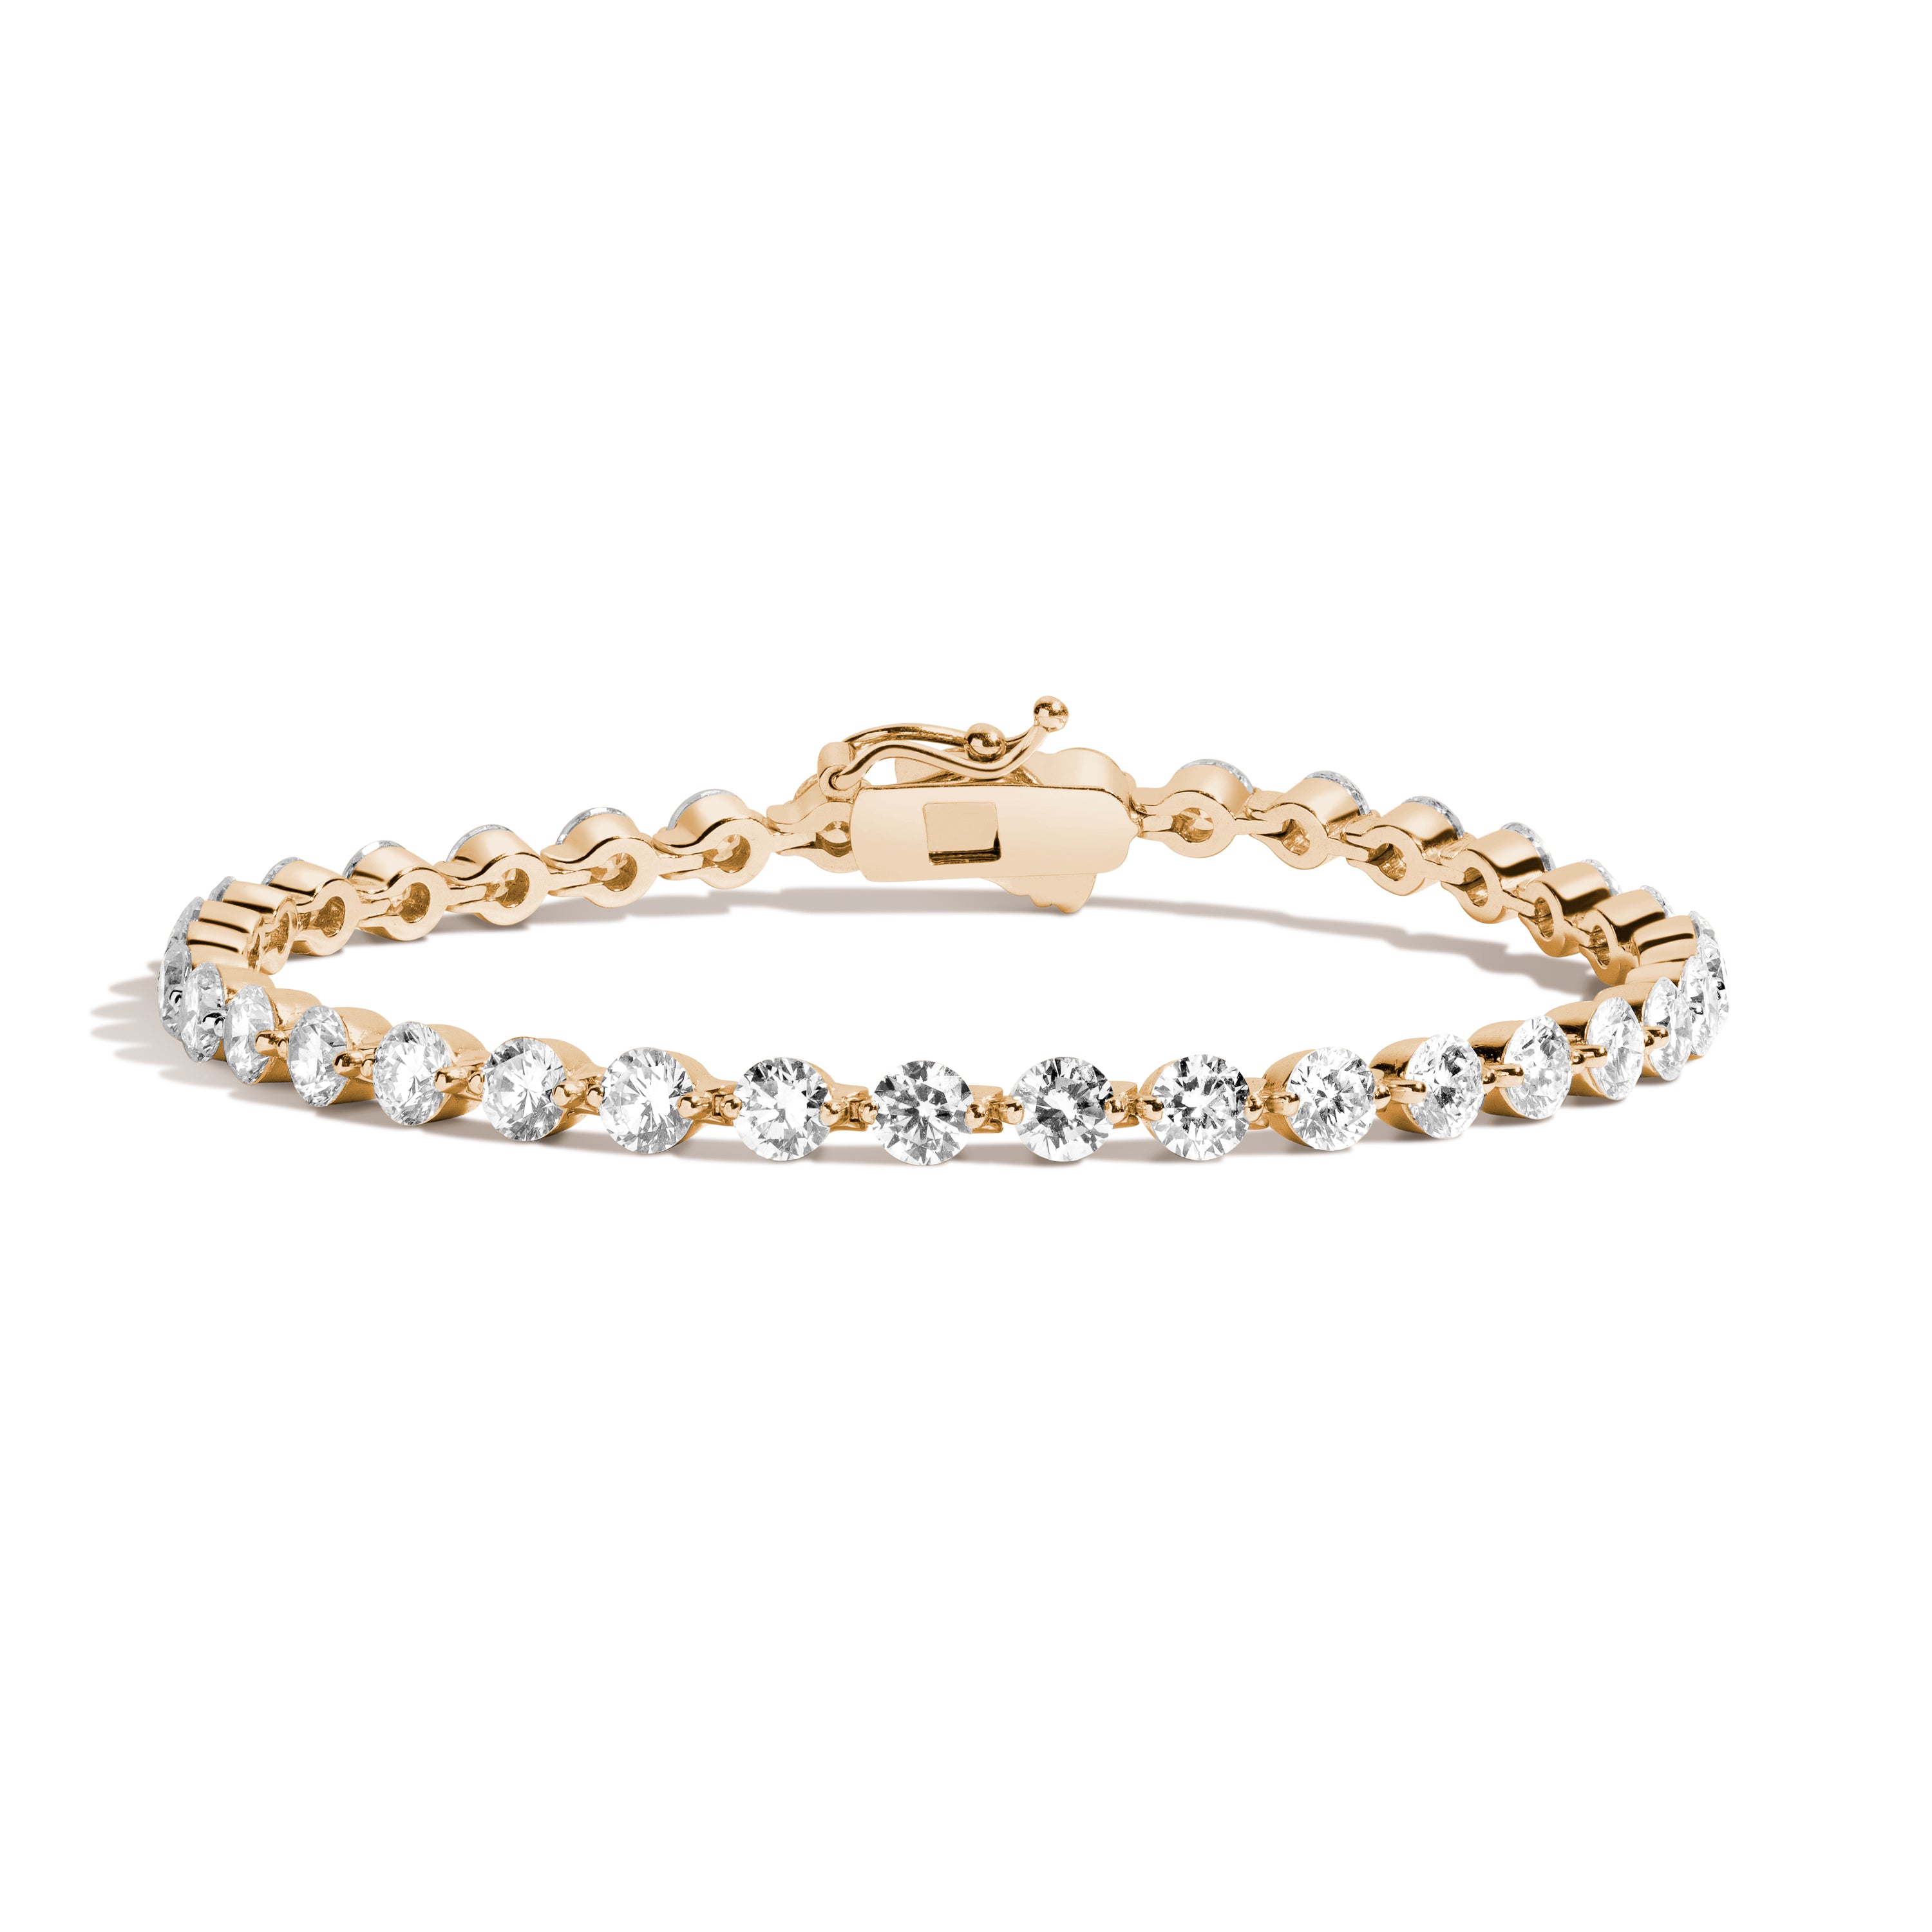 Amazon.com: namana Gold Plated Heart Tennis Bracelet for Women and Teenage  Girls, Gold Tennis Bracelets for Women set with Heart Shaped Swarovski  Crystals, Gold Bracelets for Women in a Heart Shape :